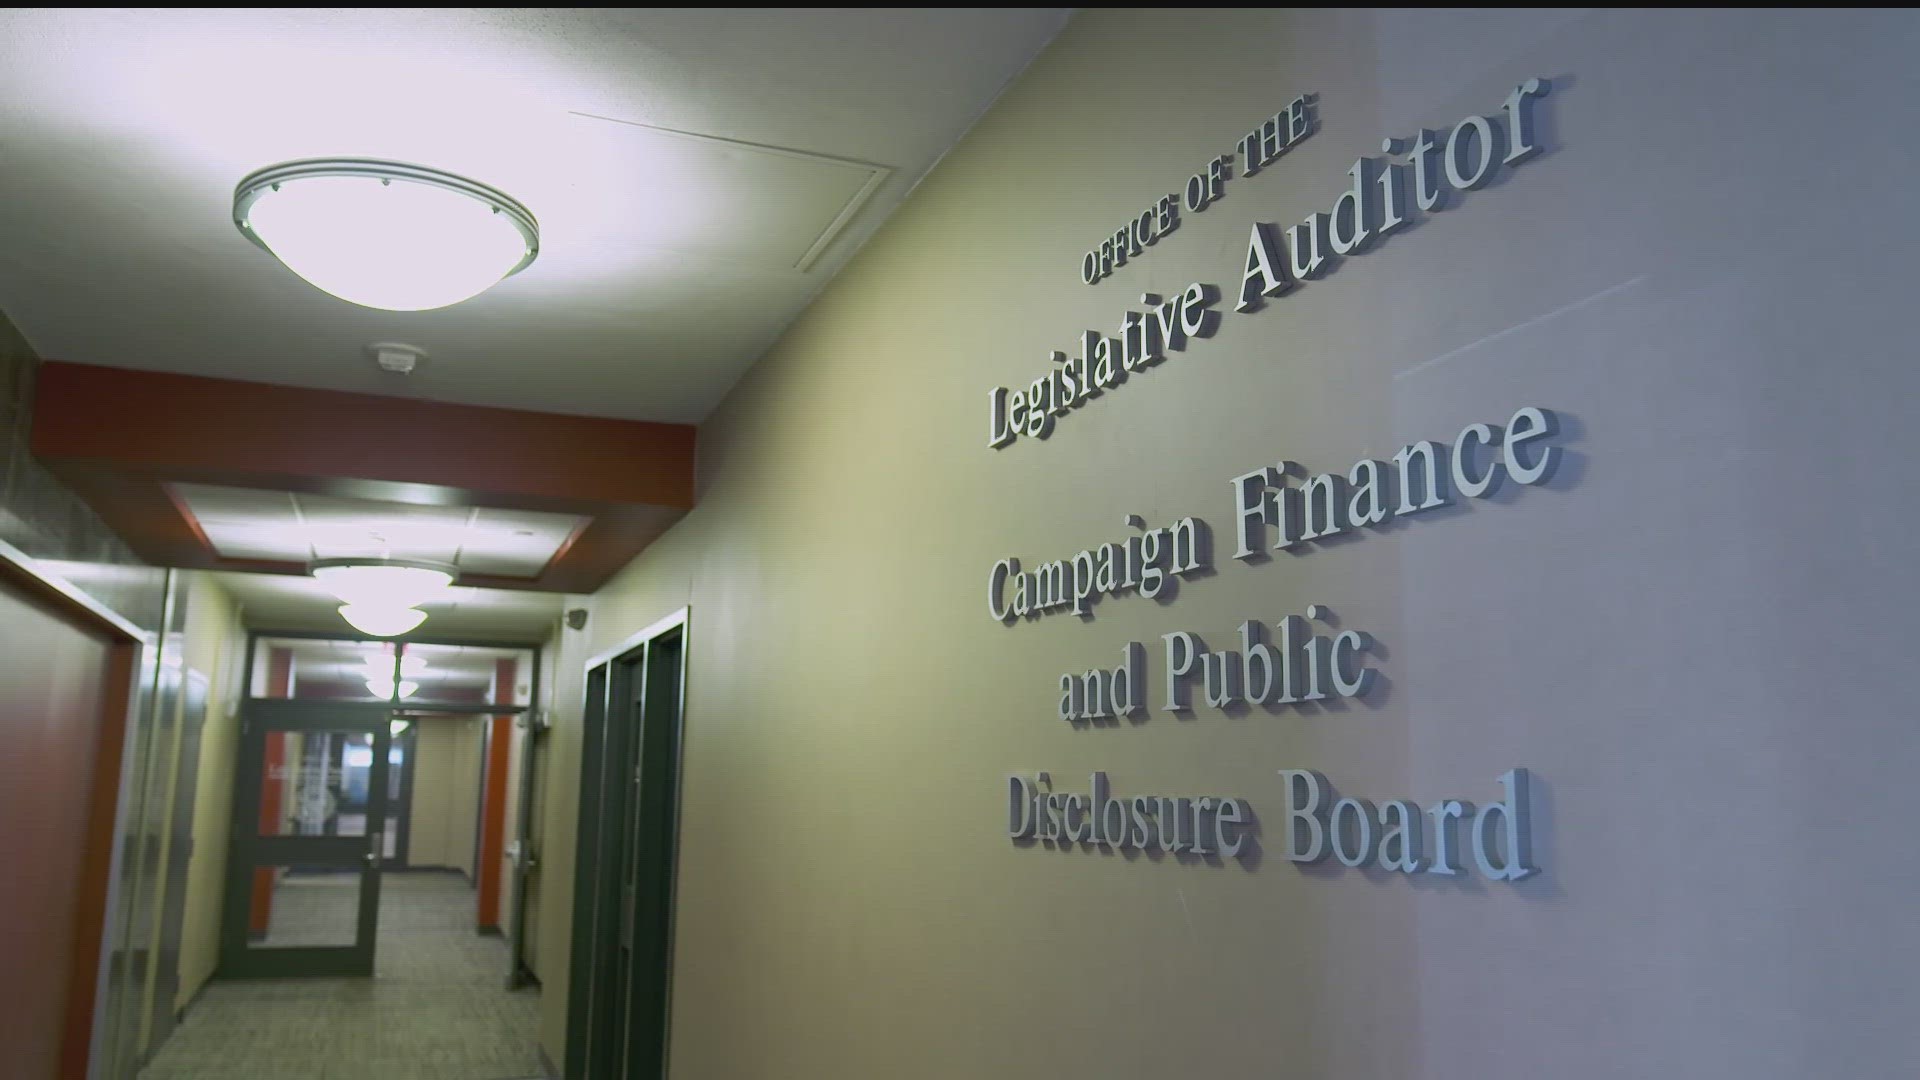 The Office of the Legislative Auditor found that state agencies largely followed the rules, but they also found some issues with emergency purchases.